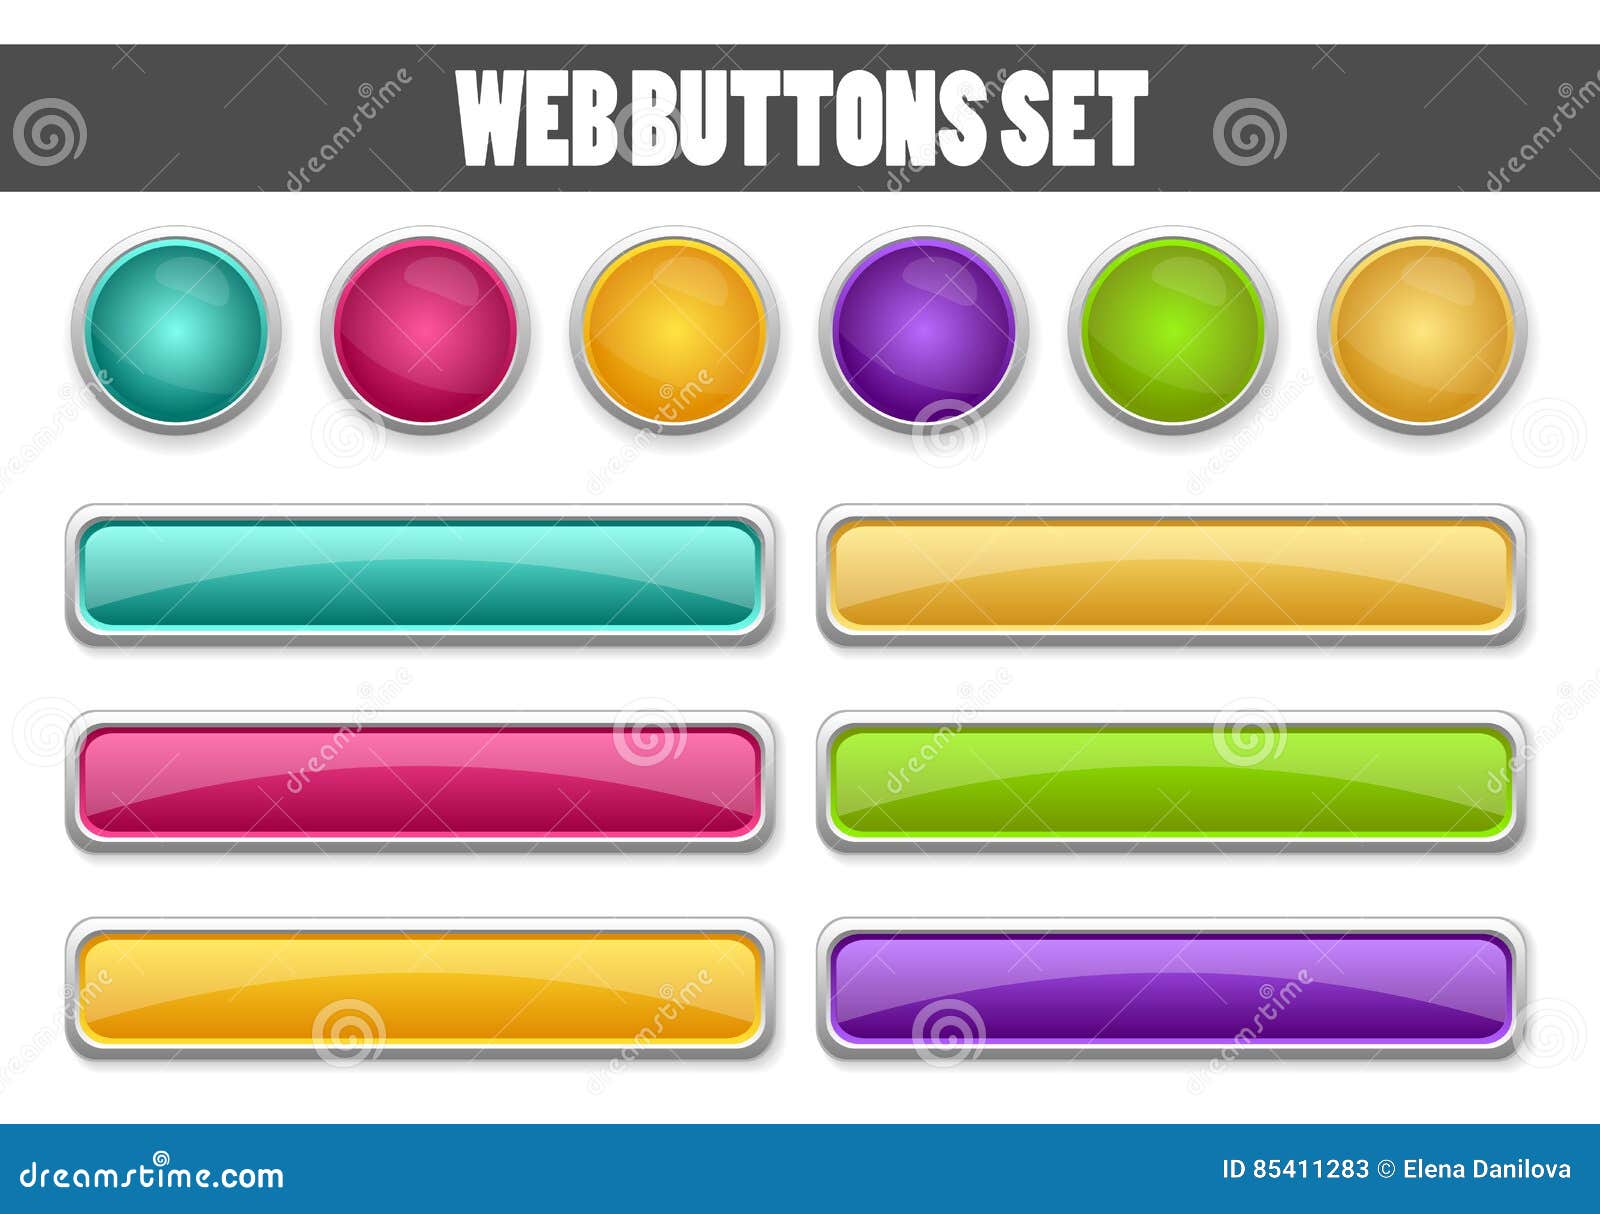 web buttons set for your 